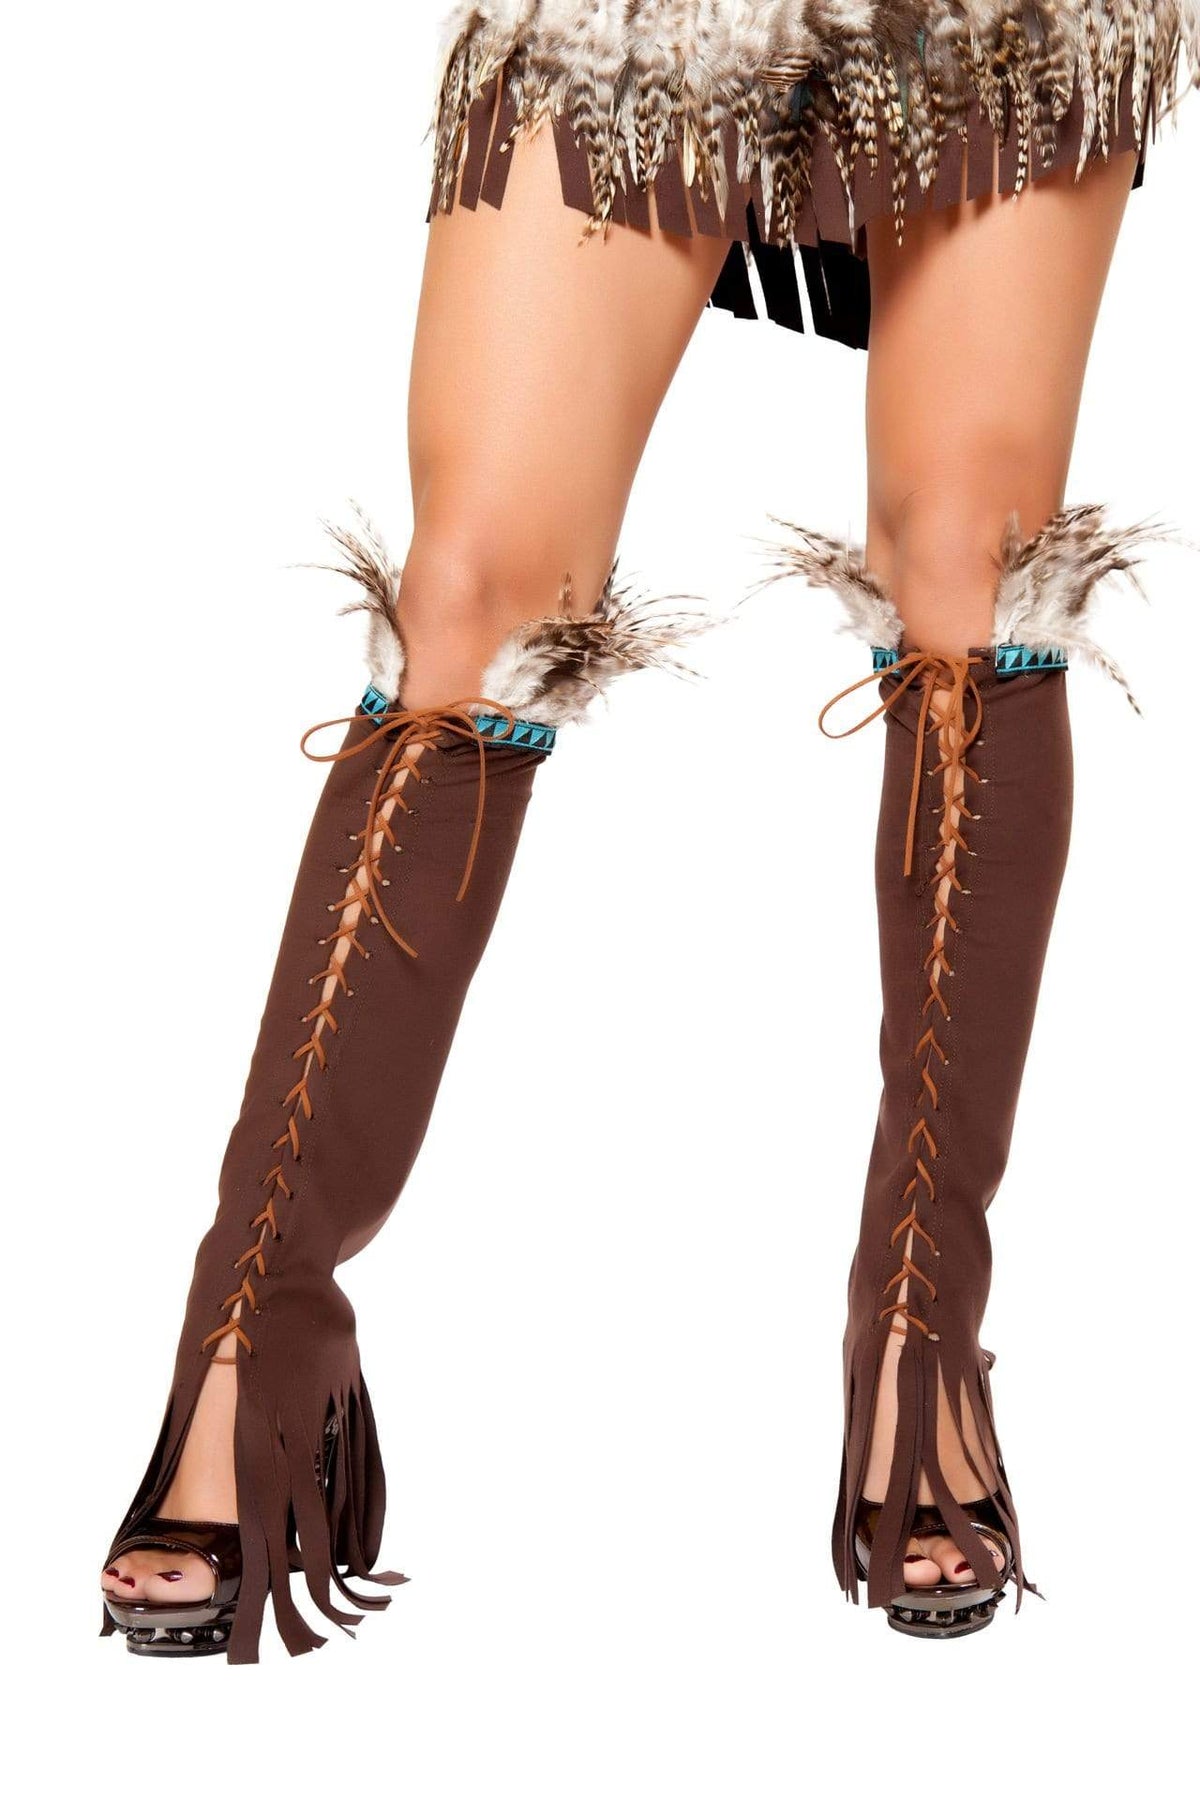 Roma OS / Brown/Honey Lace Up Suede Leg Warmer SHC-LW10106-OS-R Apparel &amp; Accessories &gt; Costumes &amp; Accessories &gt; Costumes